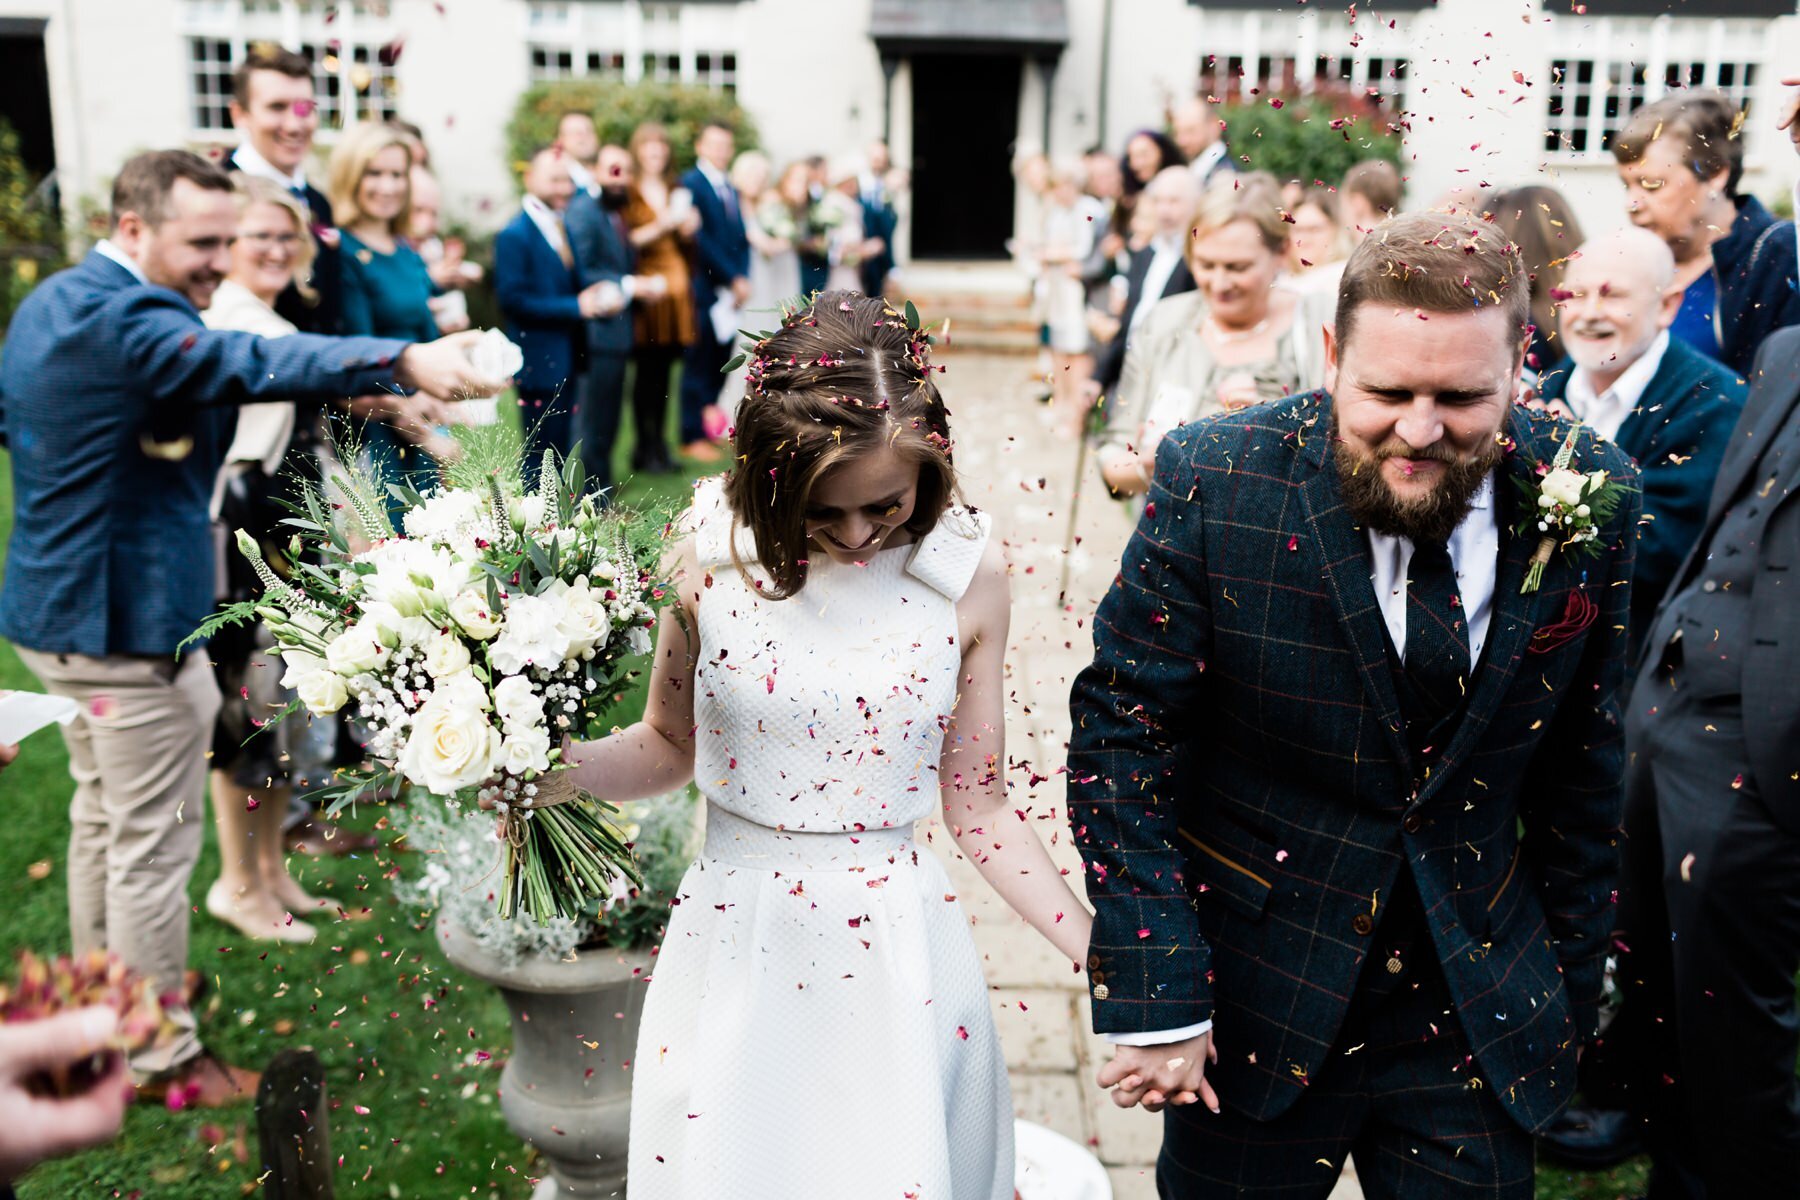 A bride and grown have confetti thrown over them at Burley Manor in the New Forest